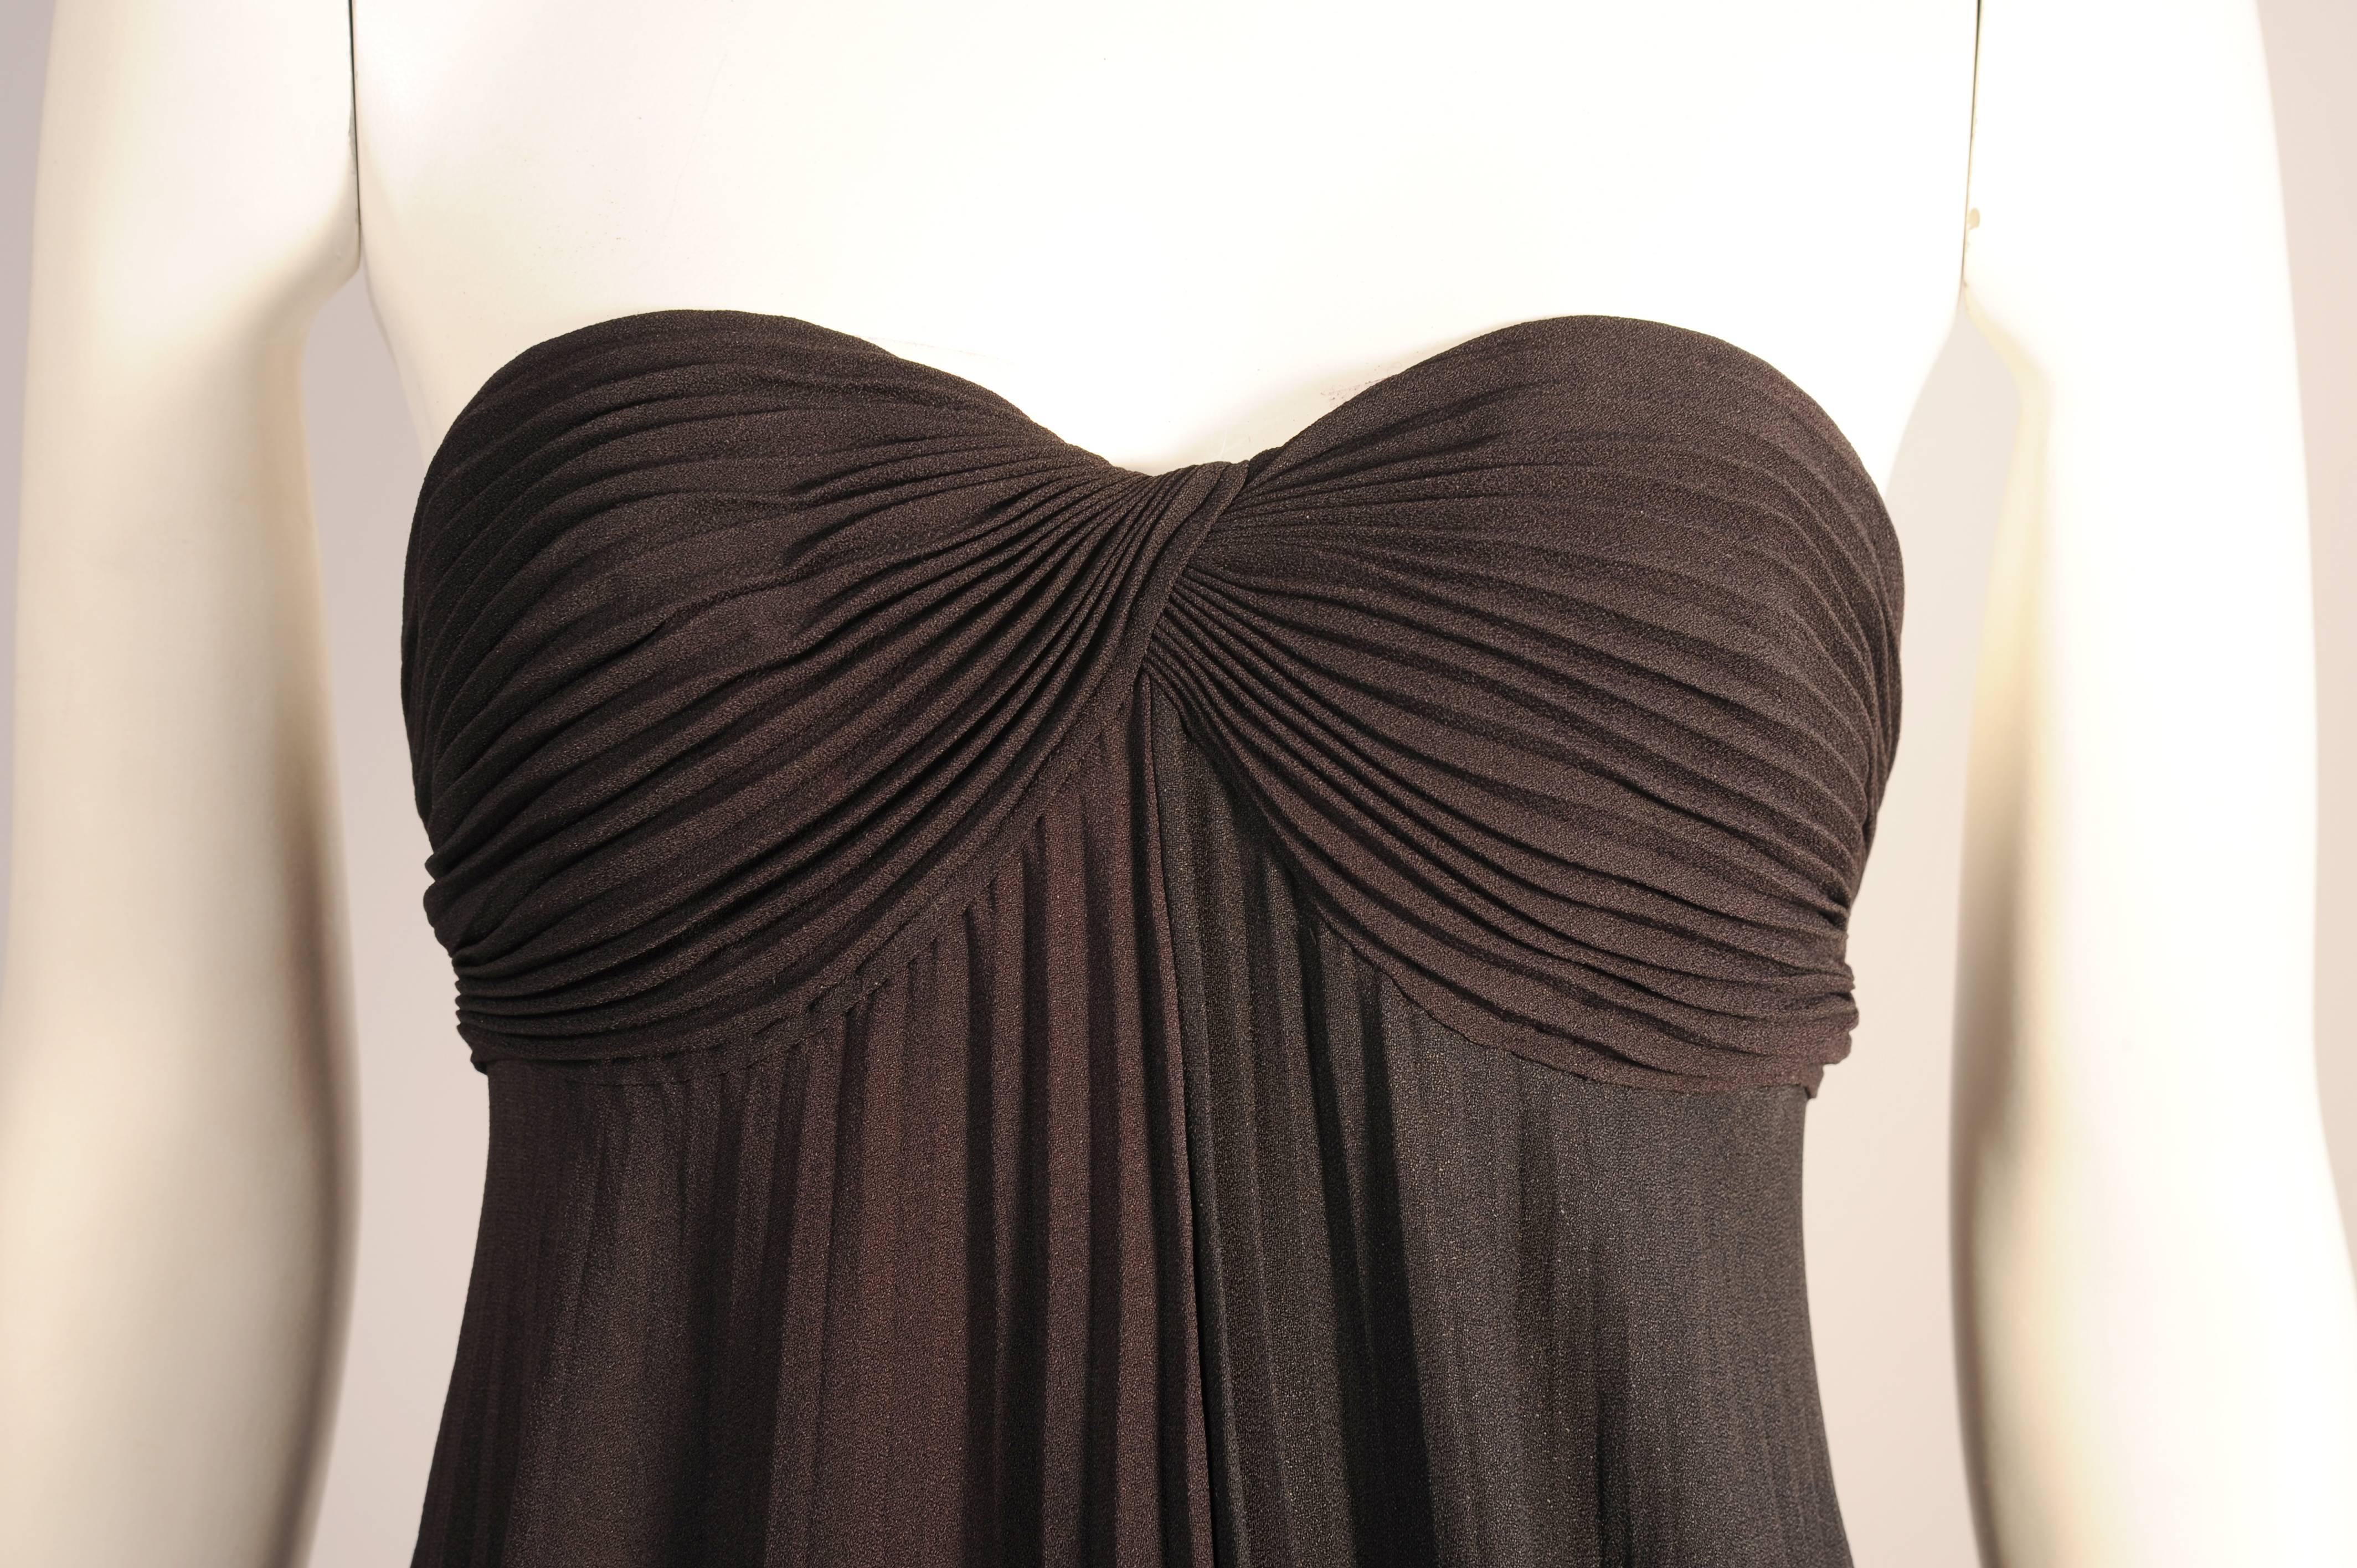 This elegant dress is a very subtle combination of the deepest bittersweet chocolate brown and inky black crepe. The dress is divided right down the middle. The bodice is black on the right side above the brown half of the dress and it is brown over